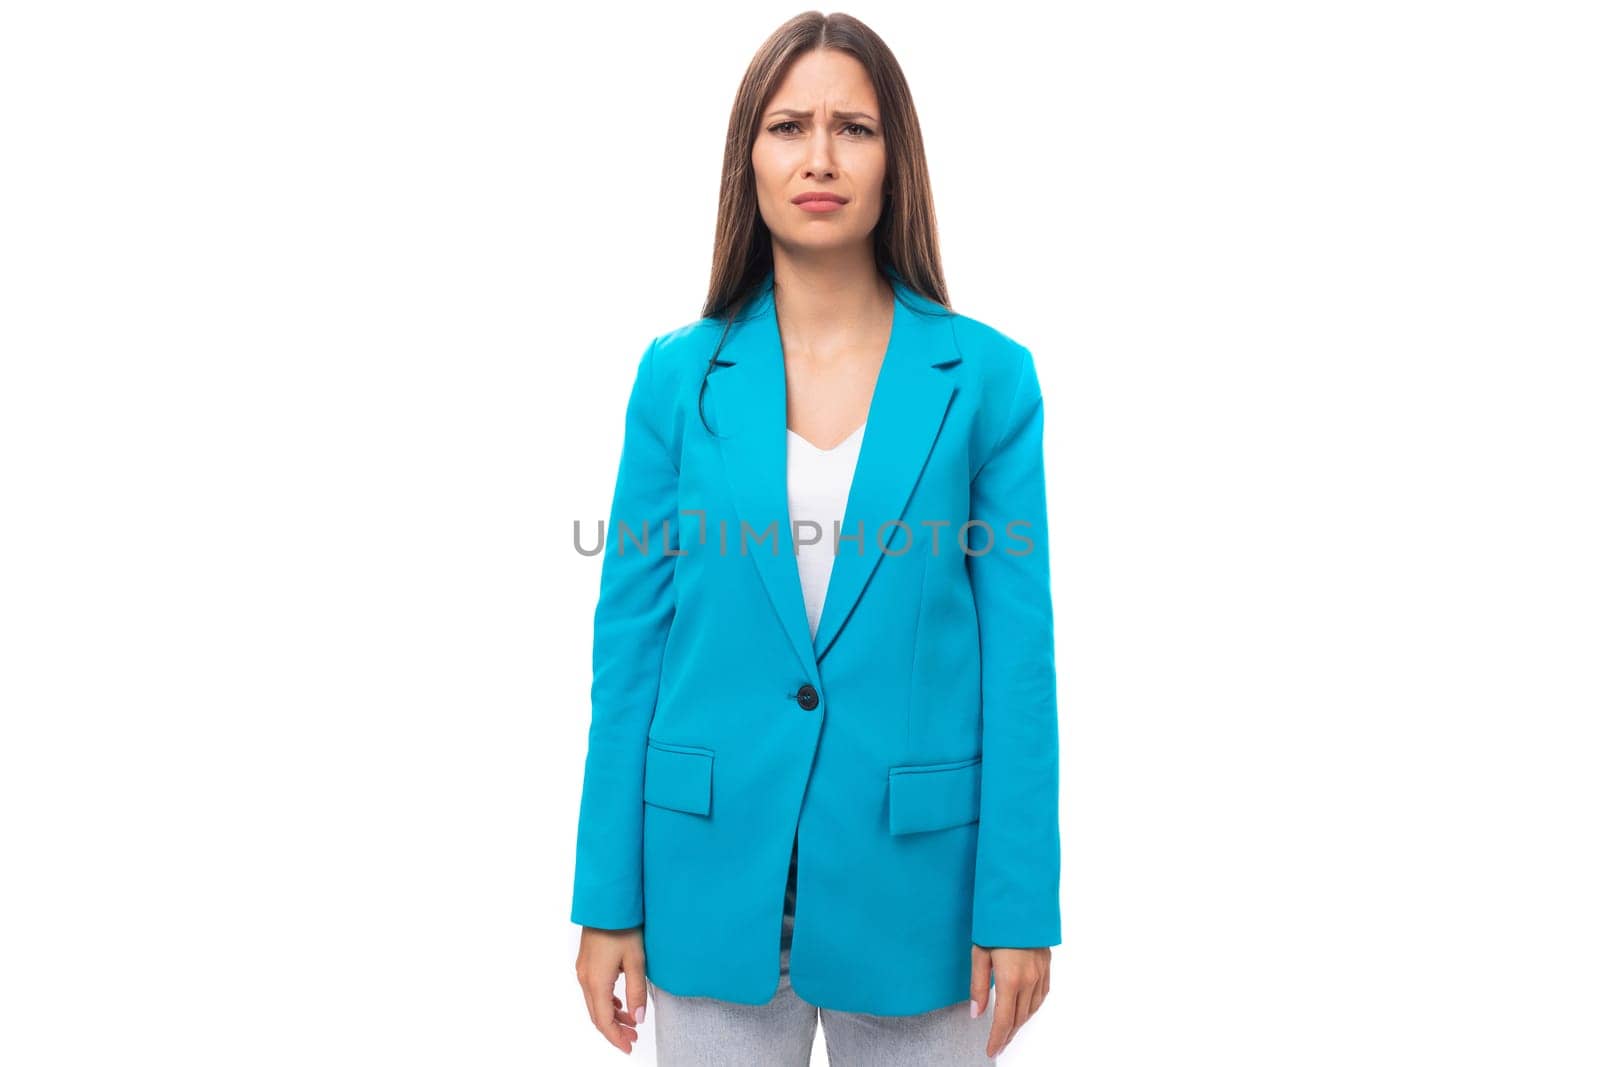 young distressed brunette model woman dressed in a stylish business jacket by TRMK